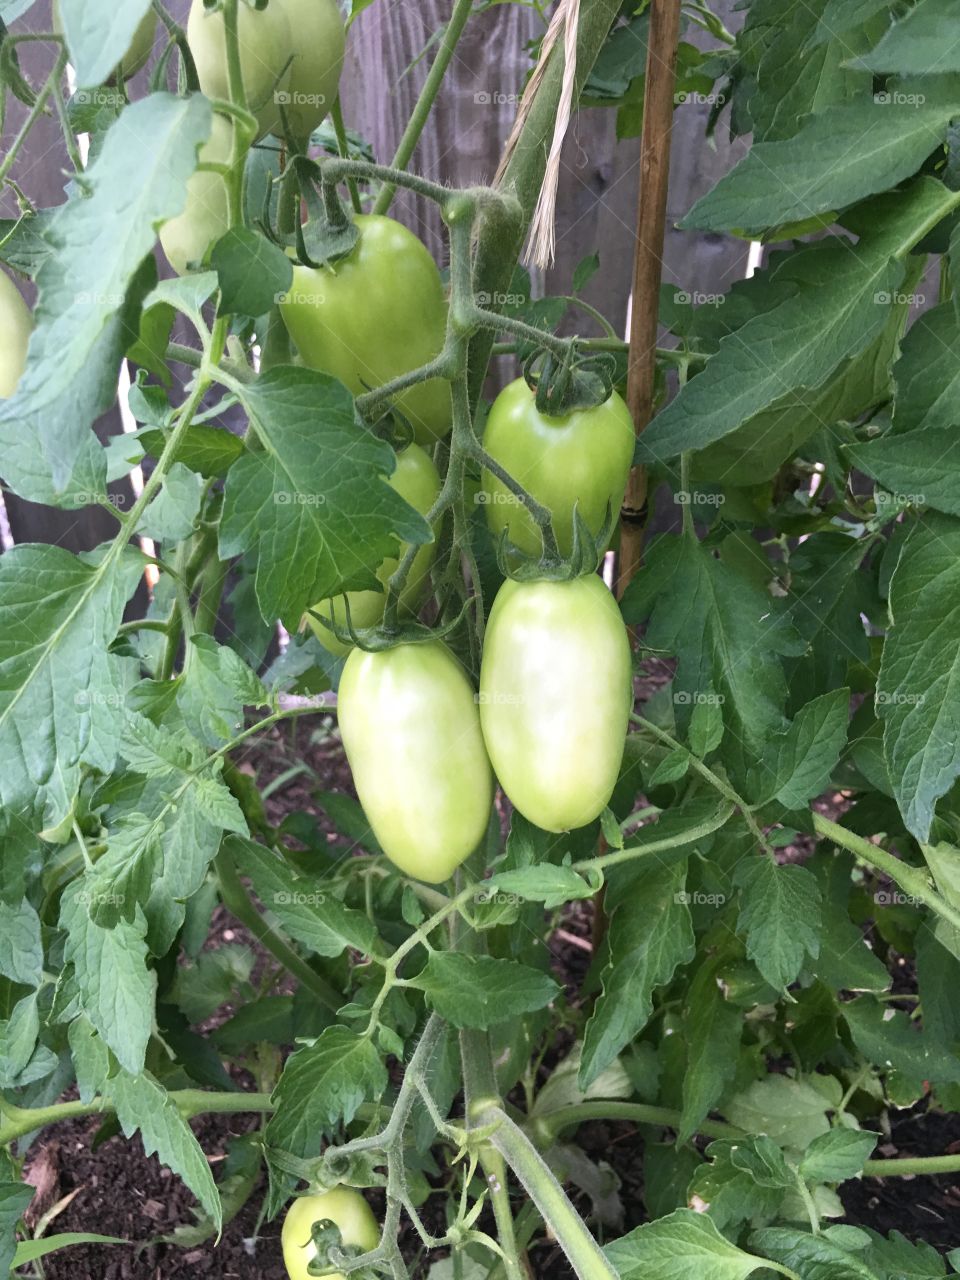 Perfect Roma-style tomatoes waiting to ripen. 